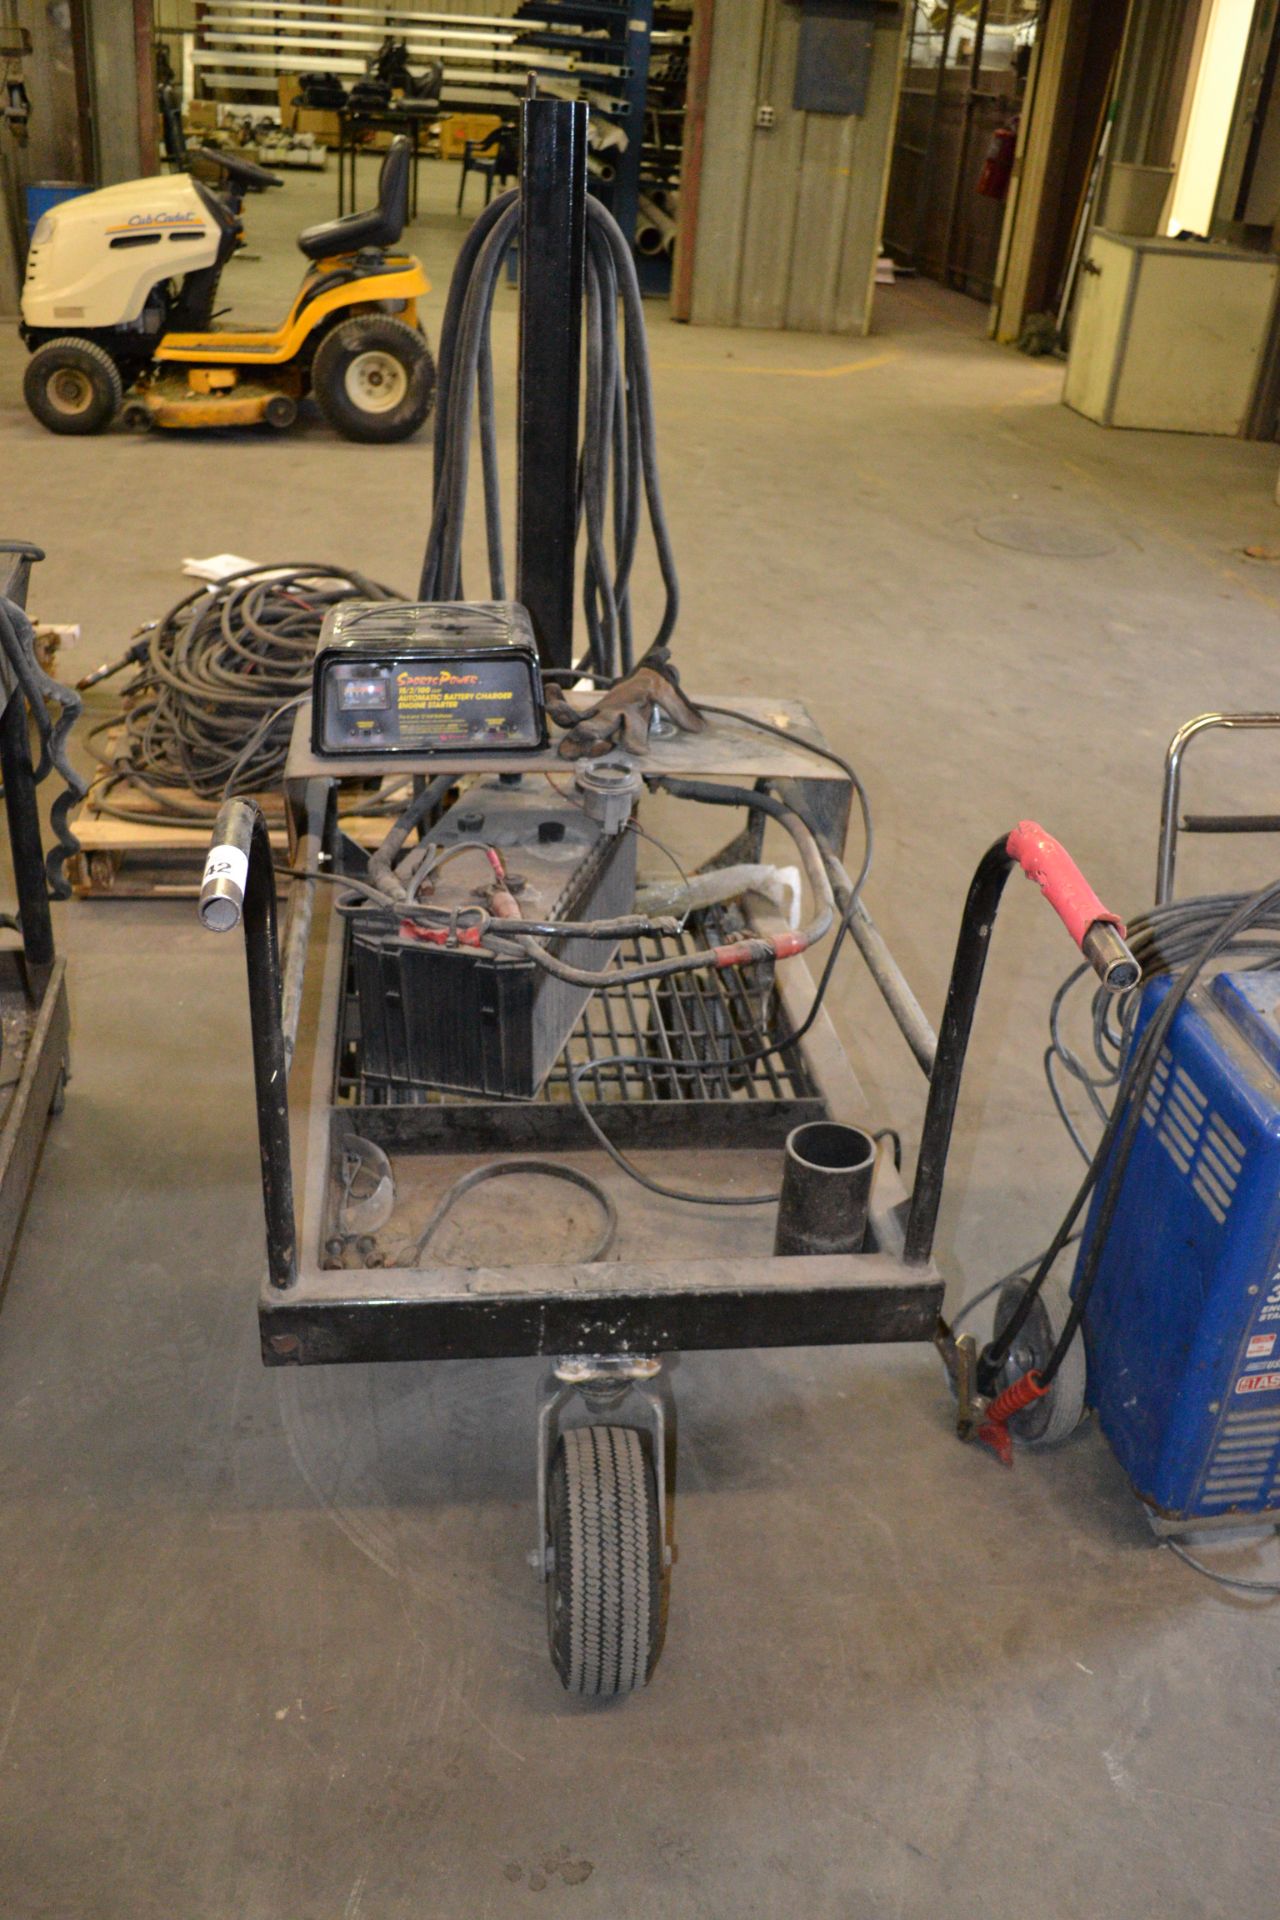 battery charger system on cart